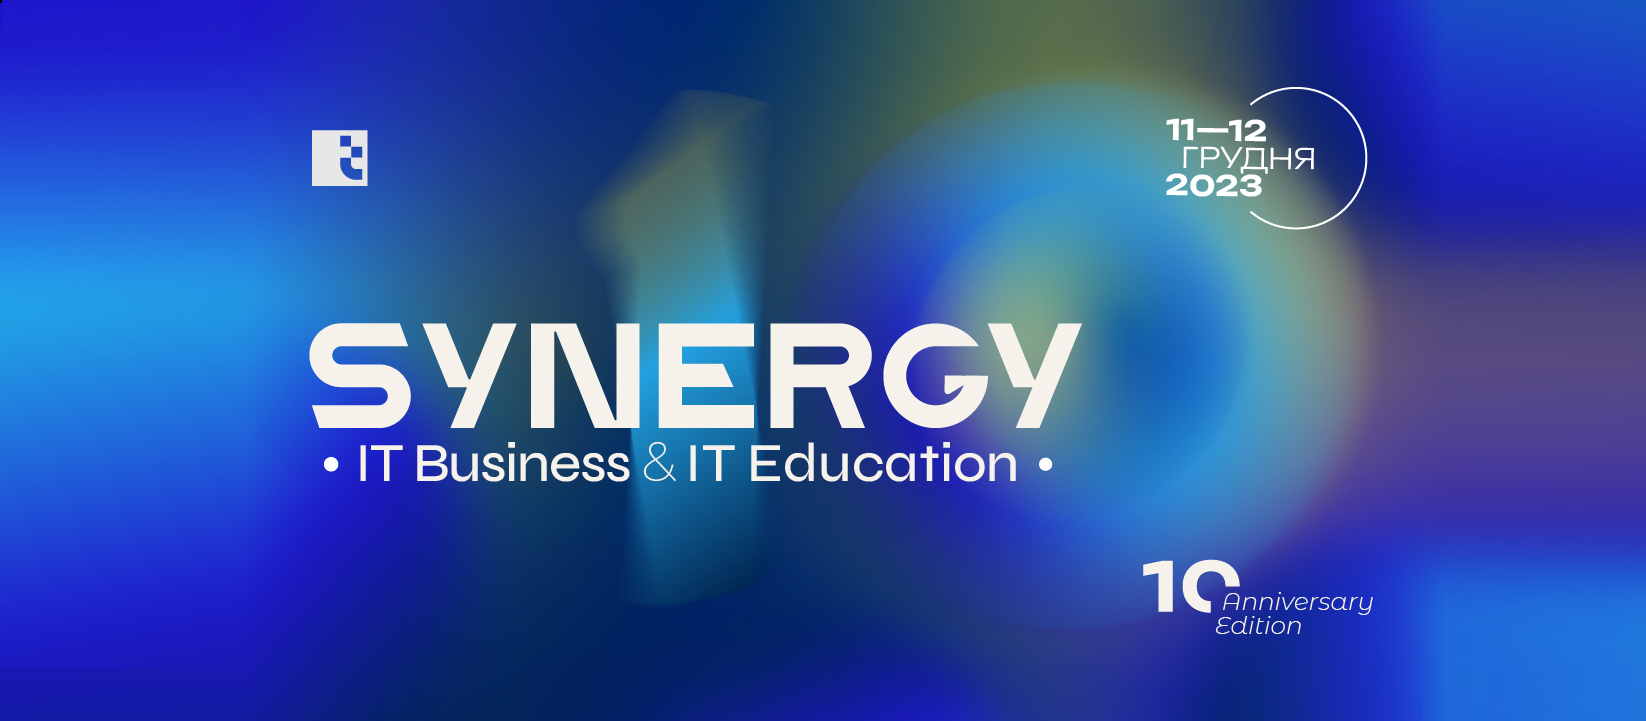  Synergy. IT Business & IT Education: 10th anniversary edition!